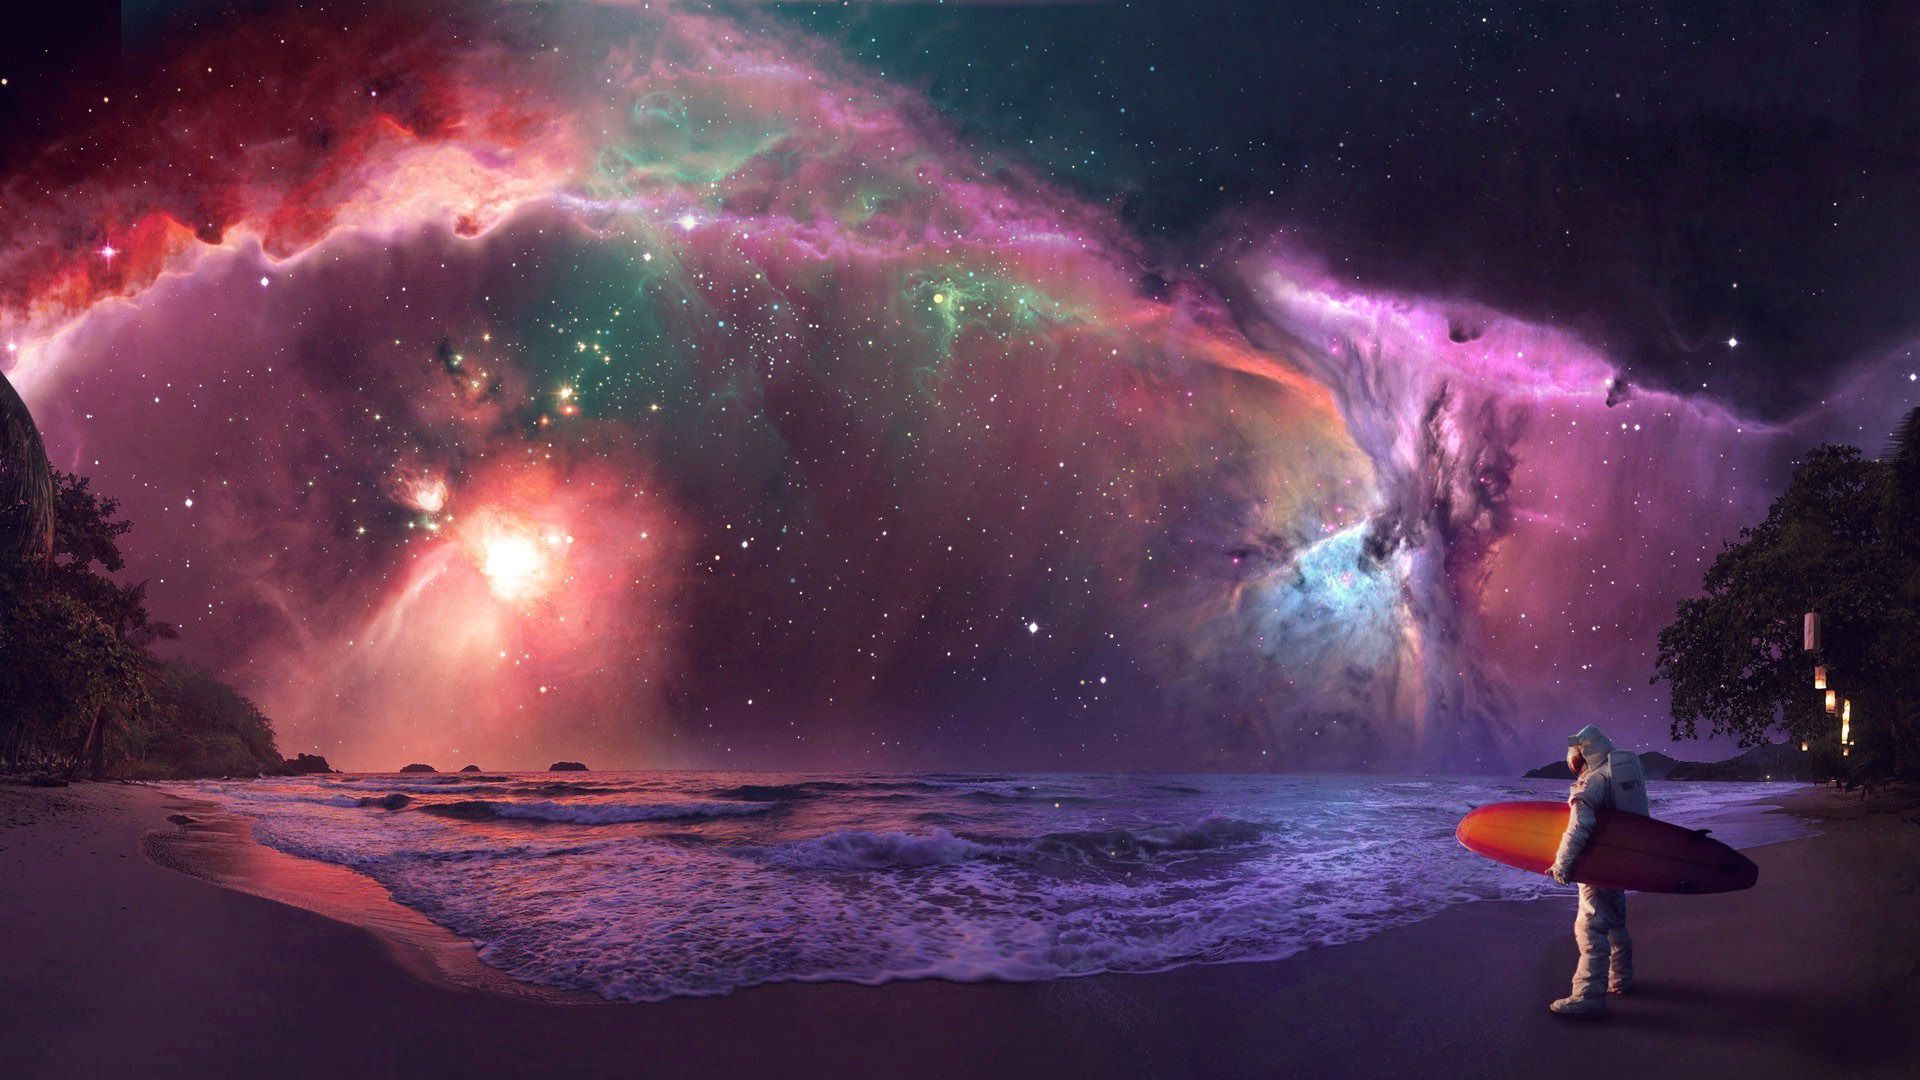 Surfing astronaut under the colorful night sky HD Wallpaper 1920x1080 1396 - Colorful Sky Wallpaper